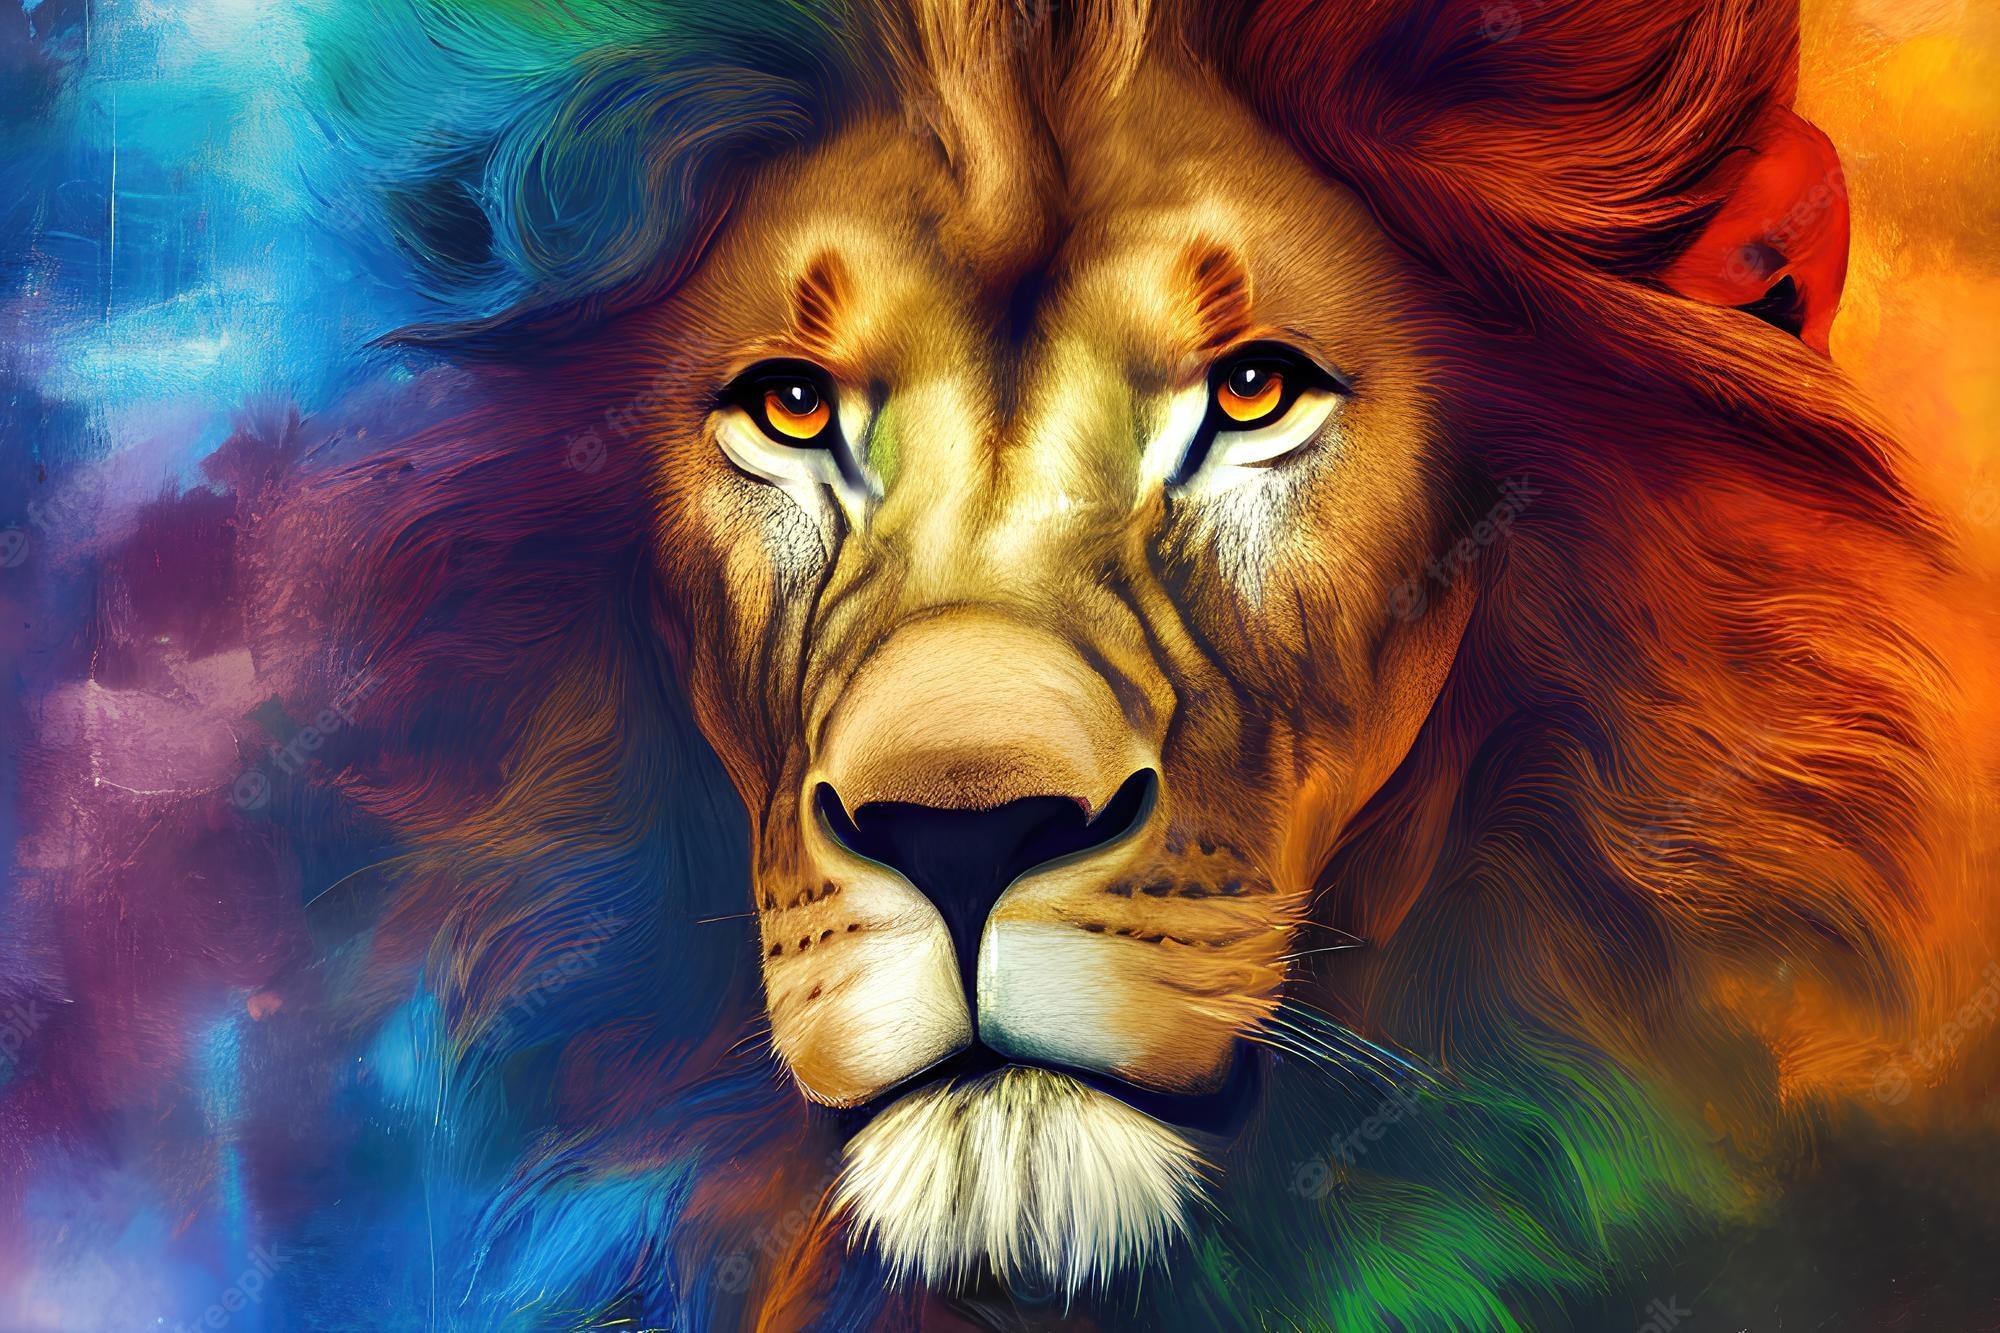 Lion and Sun Wallpapers - Top Free Lion and Sun Backgrounds ...